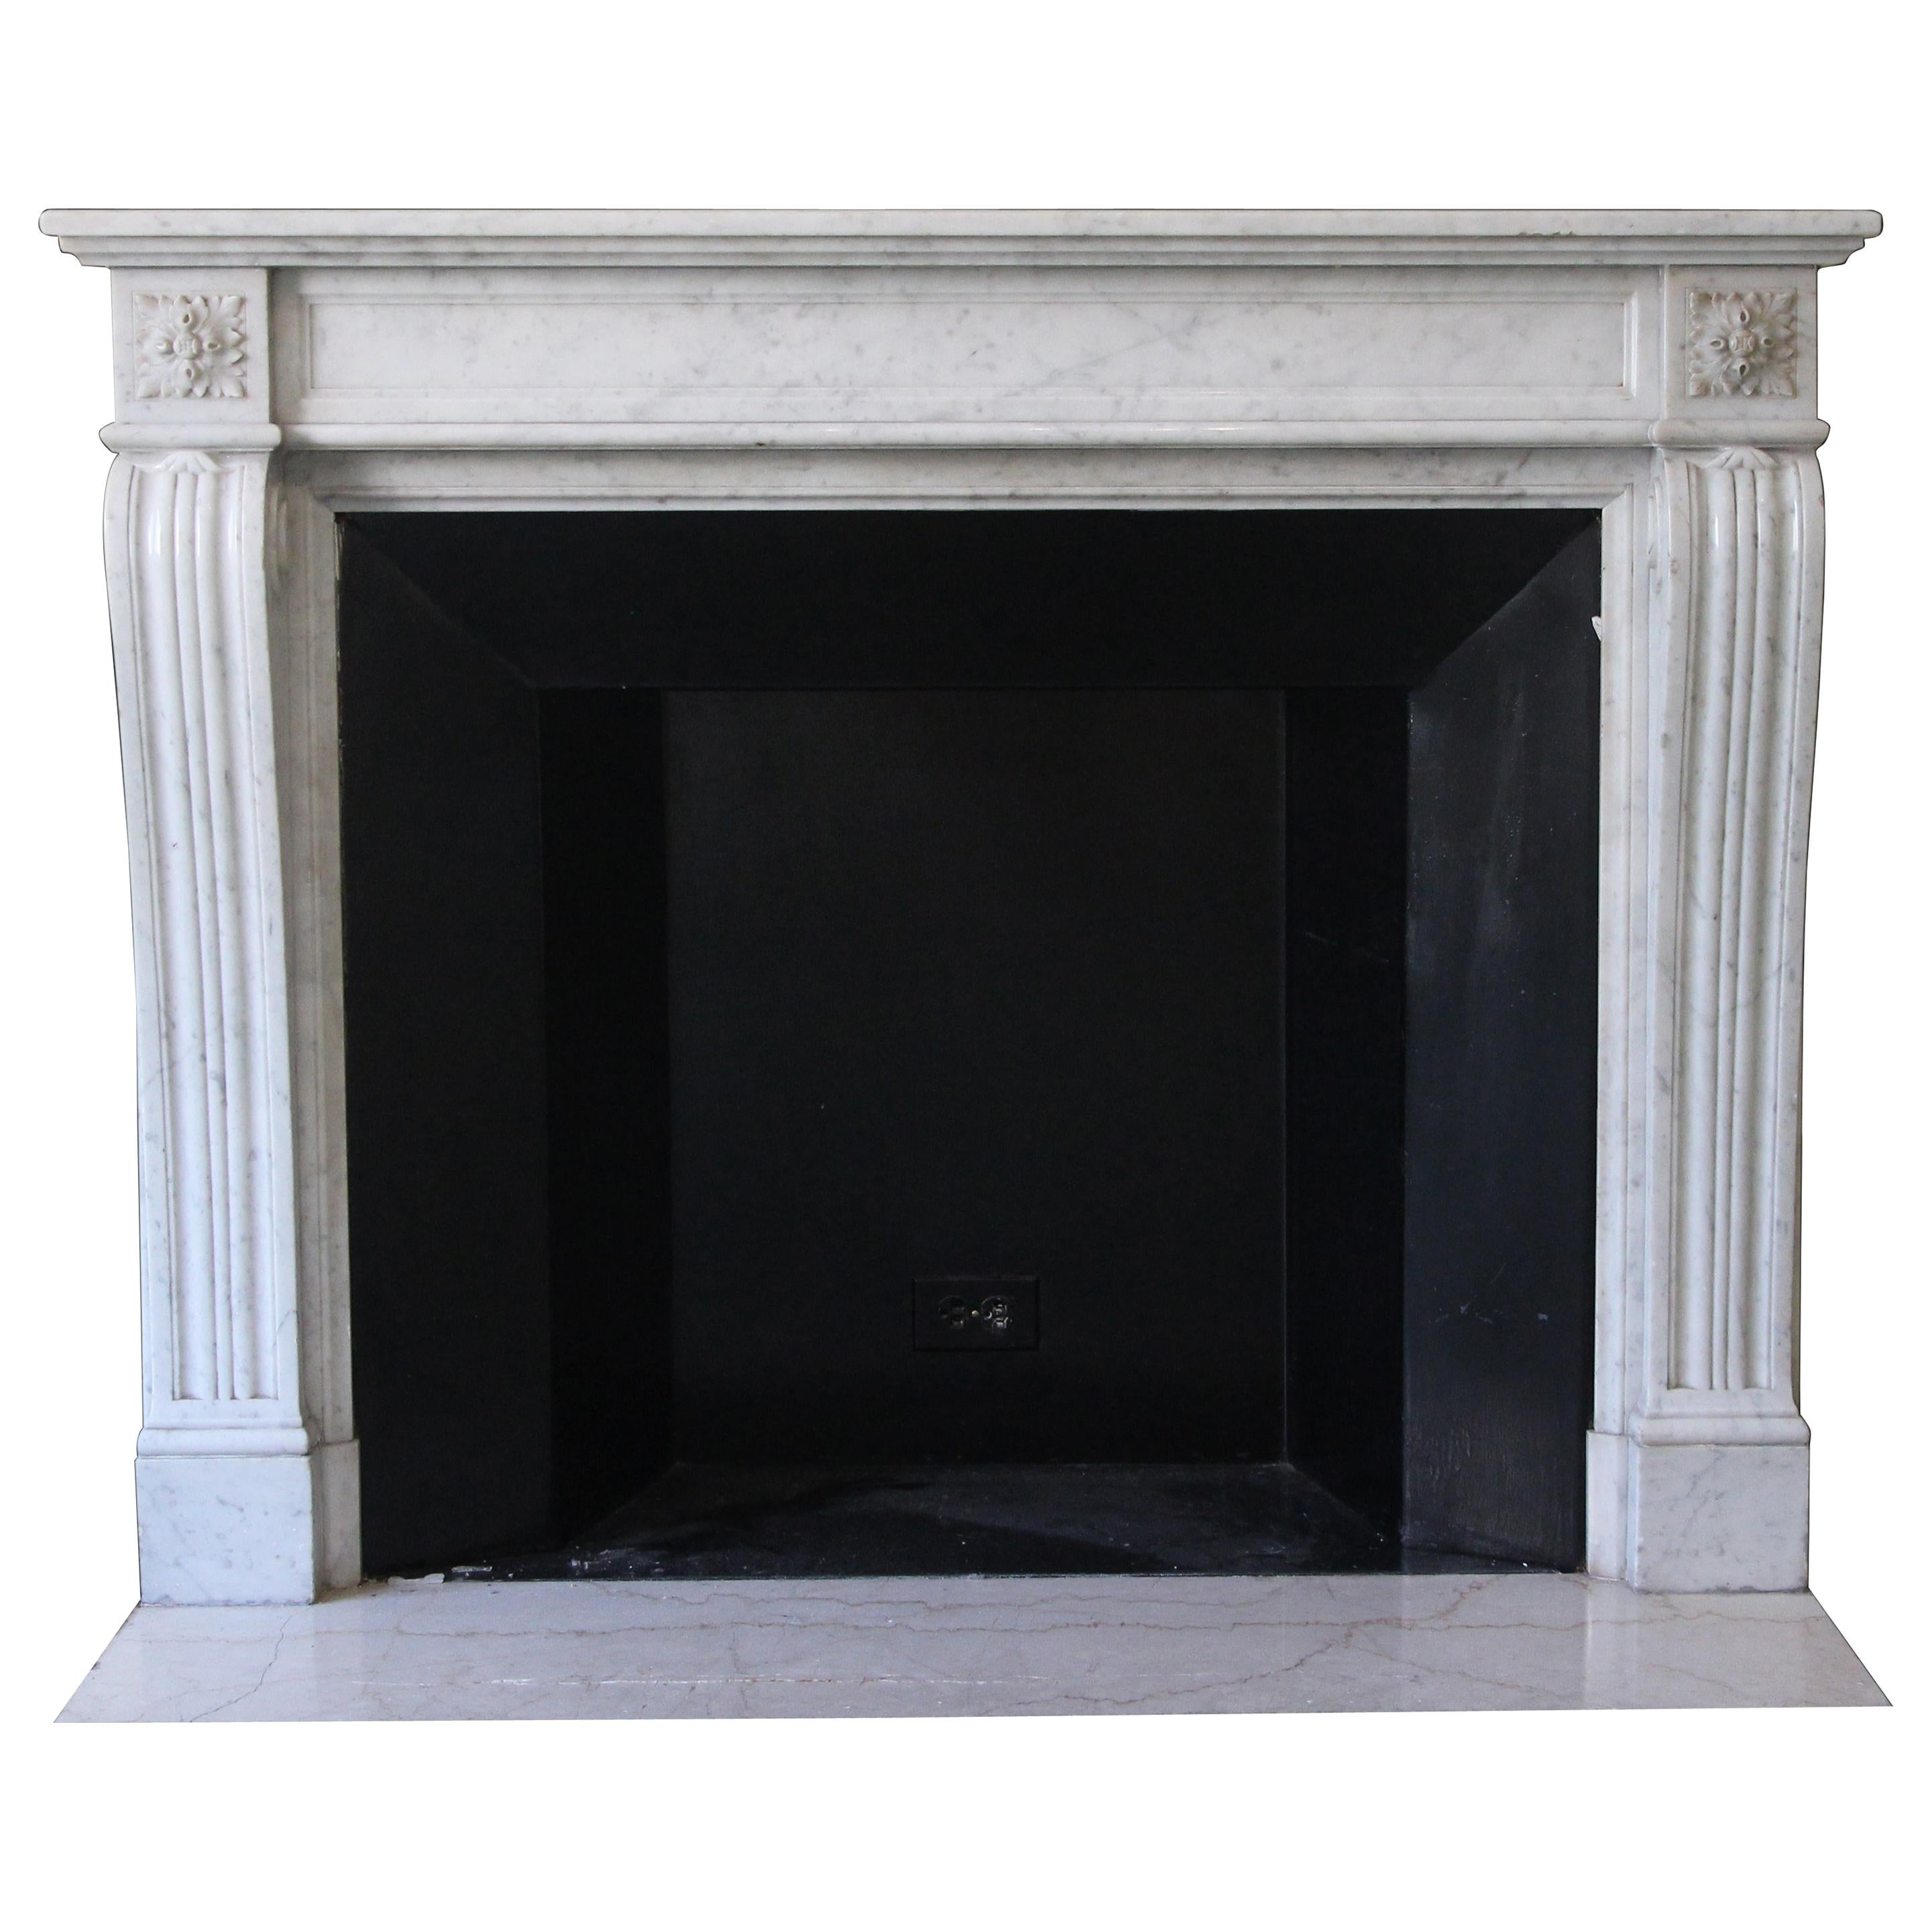 Early 1900s French Regency Carved Carrara Marble Mantel from Waldorf Astoria